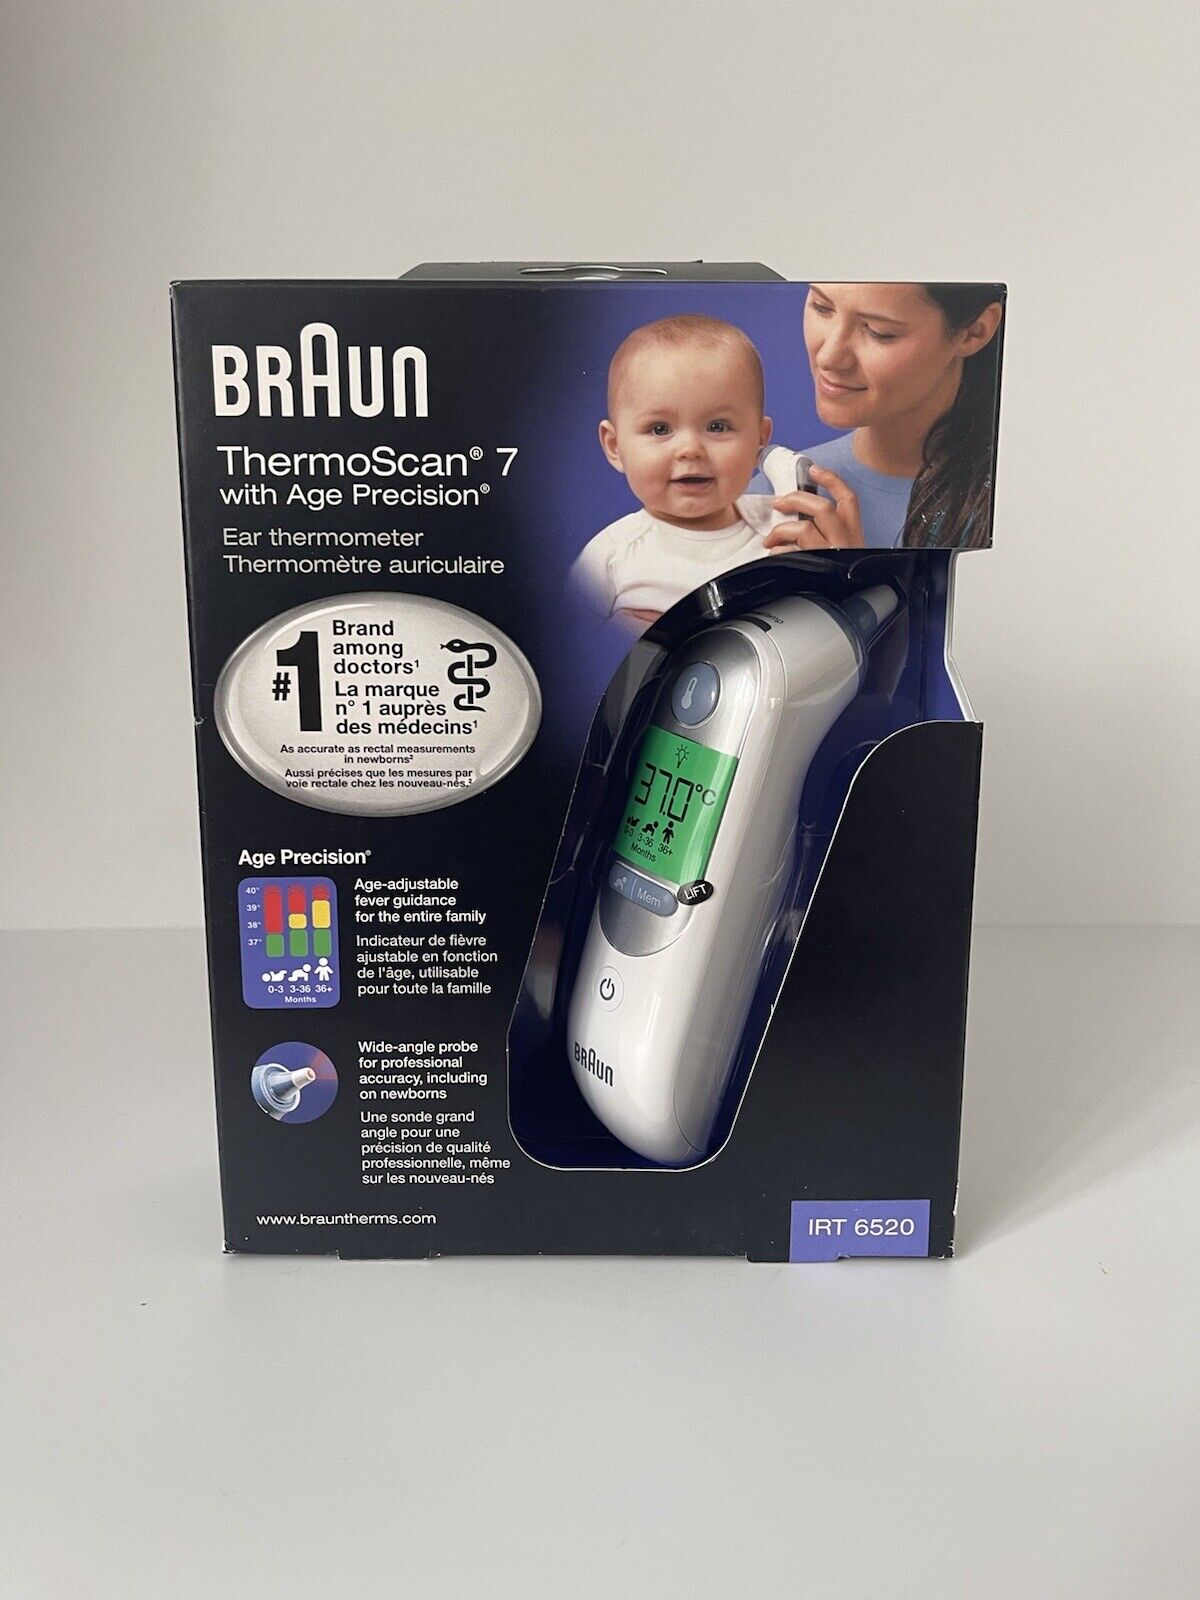 Braun ThermoScan 7 with Age Precision IRT6520 Ear Thermometer Digital